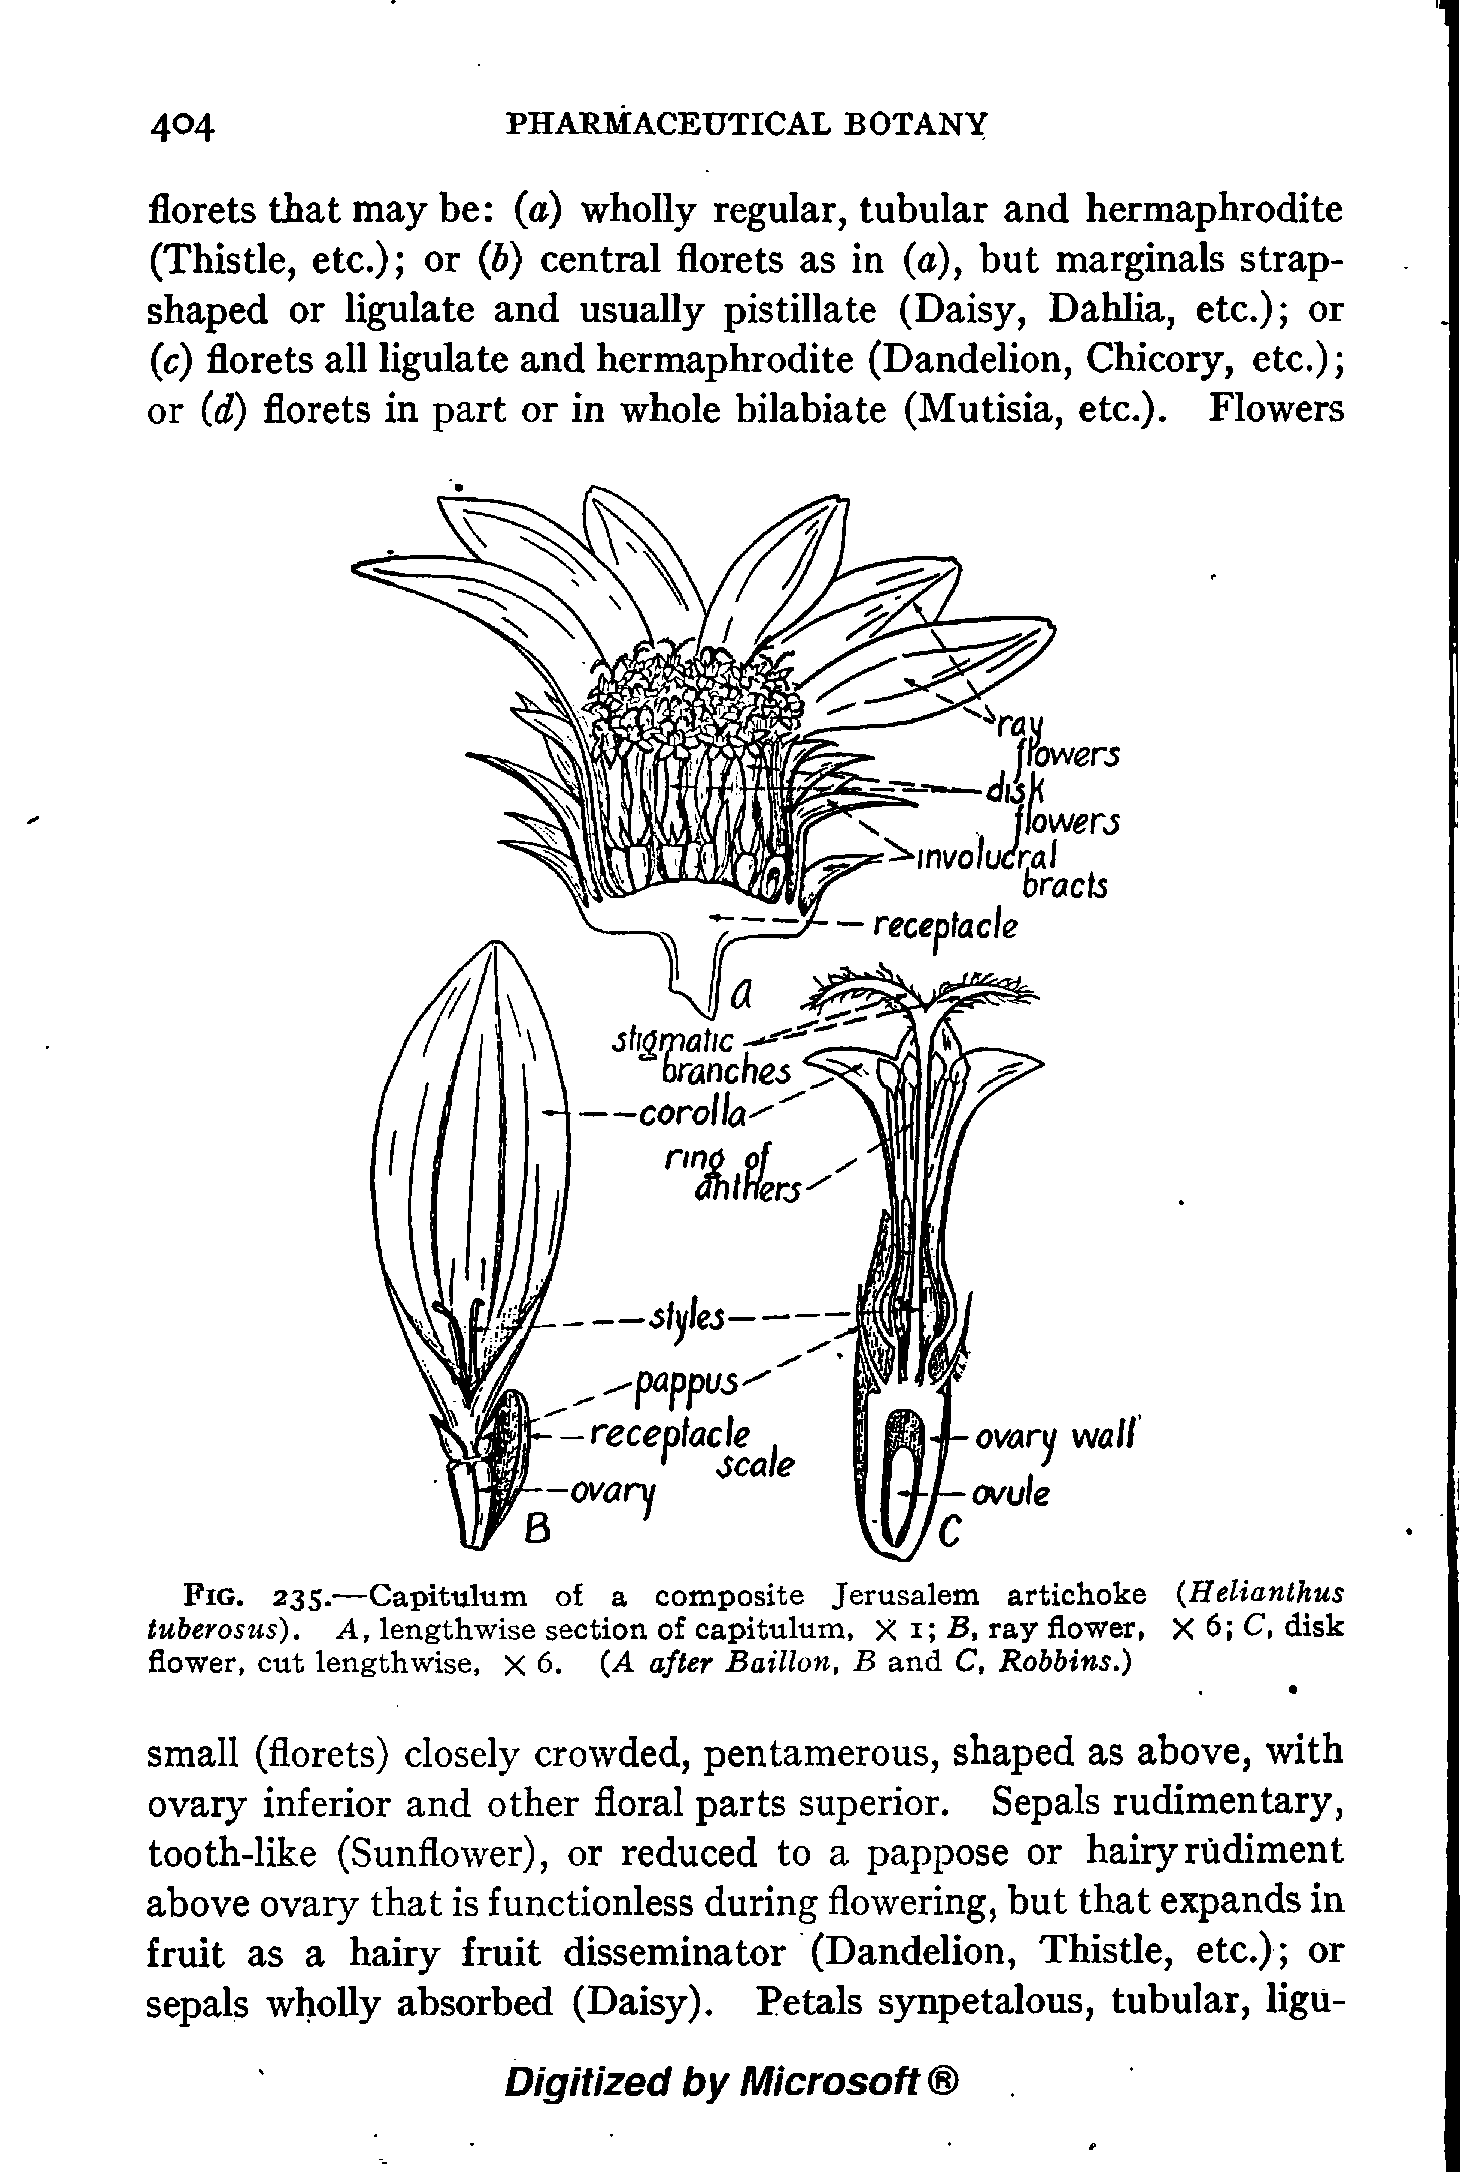 Fig. 235.-—Capitulum o a composite Jerusalem artichoke Helianlhus tuberosus). A, lengthwise section of capitulum, X i B. ray flower, X 6 C, disk flower, cut lengthwise, X 6. (A after Baillon, B and C, Robbins.)...